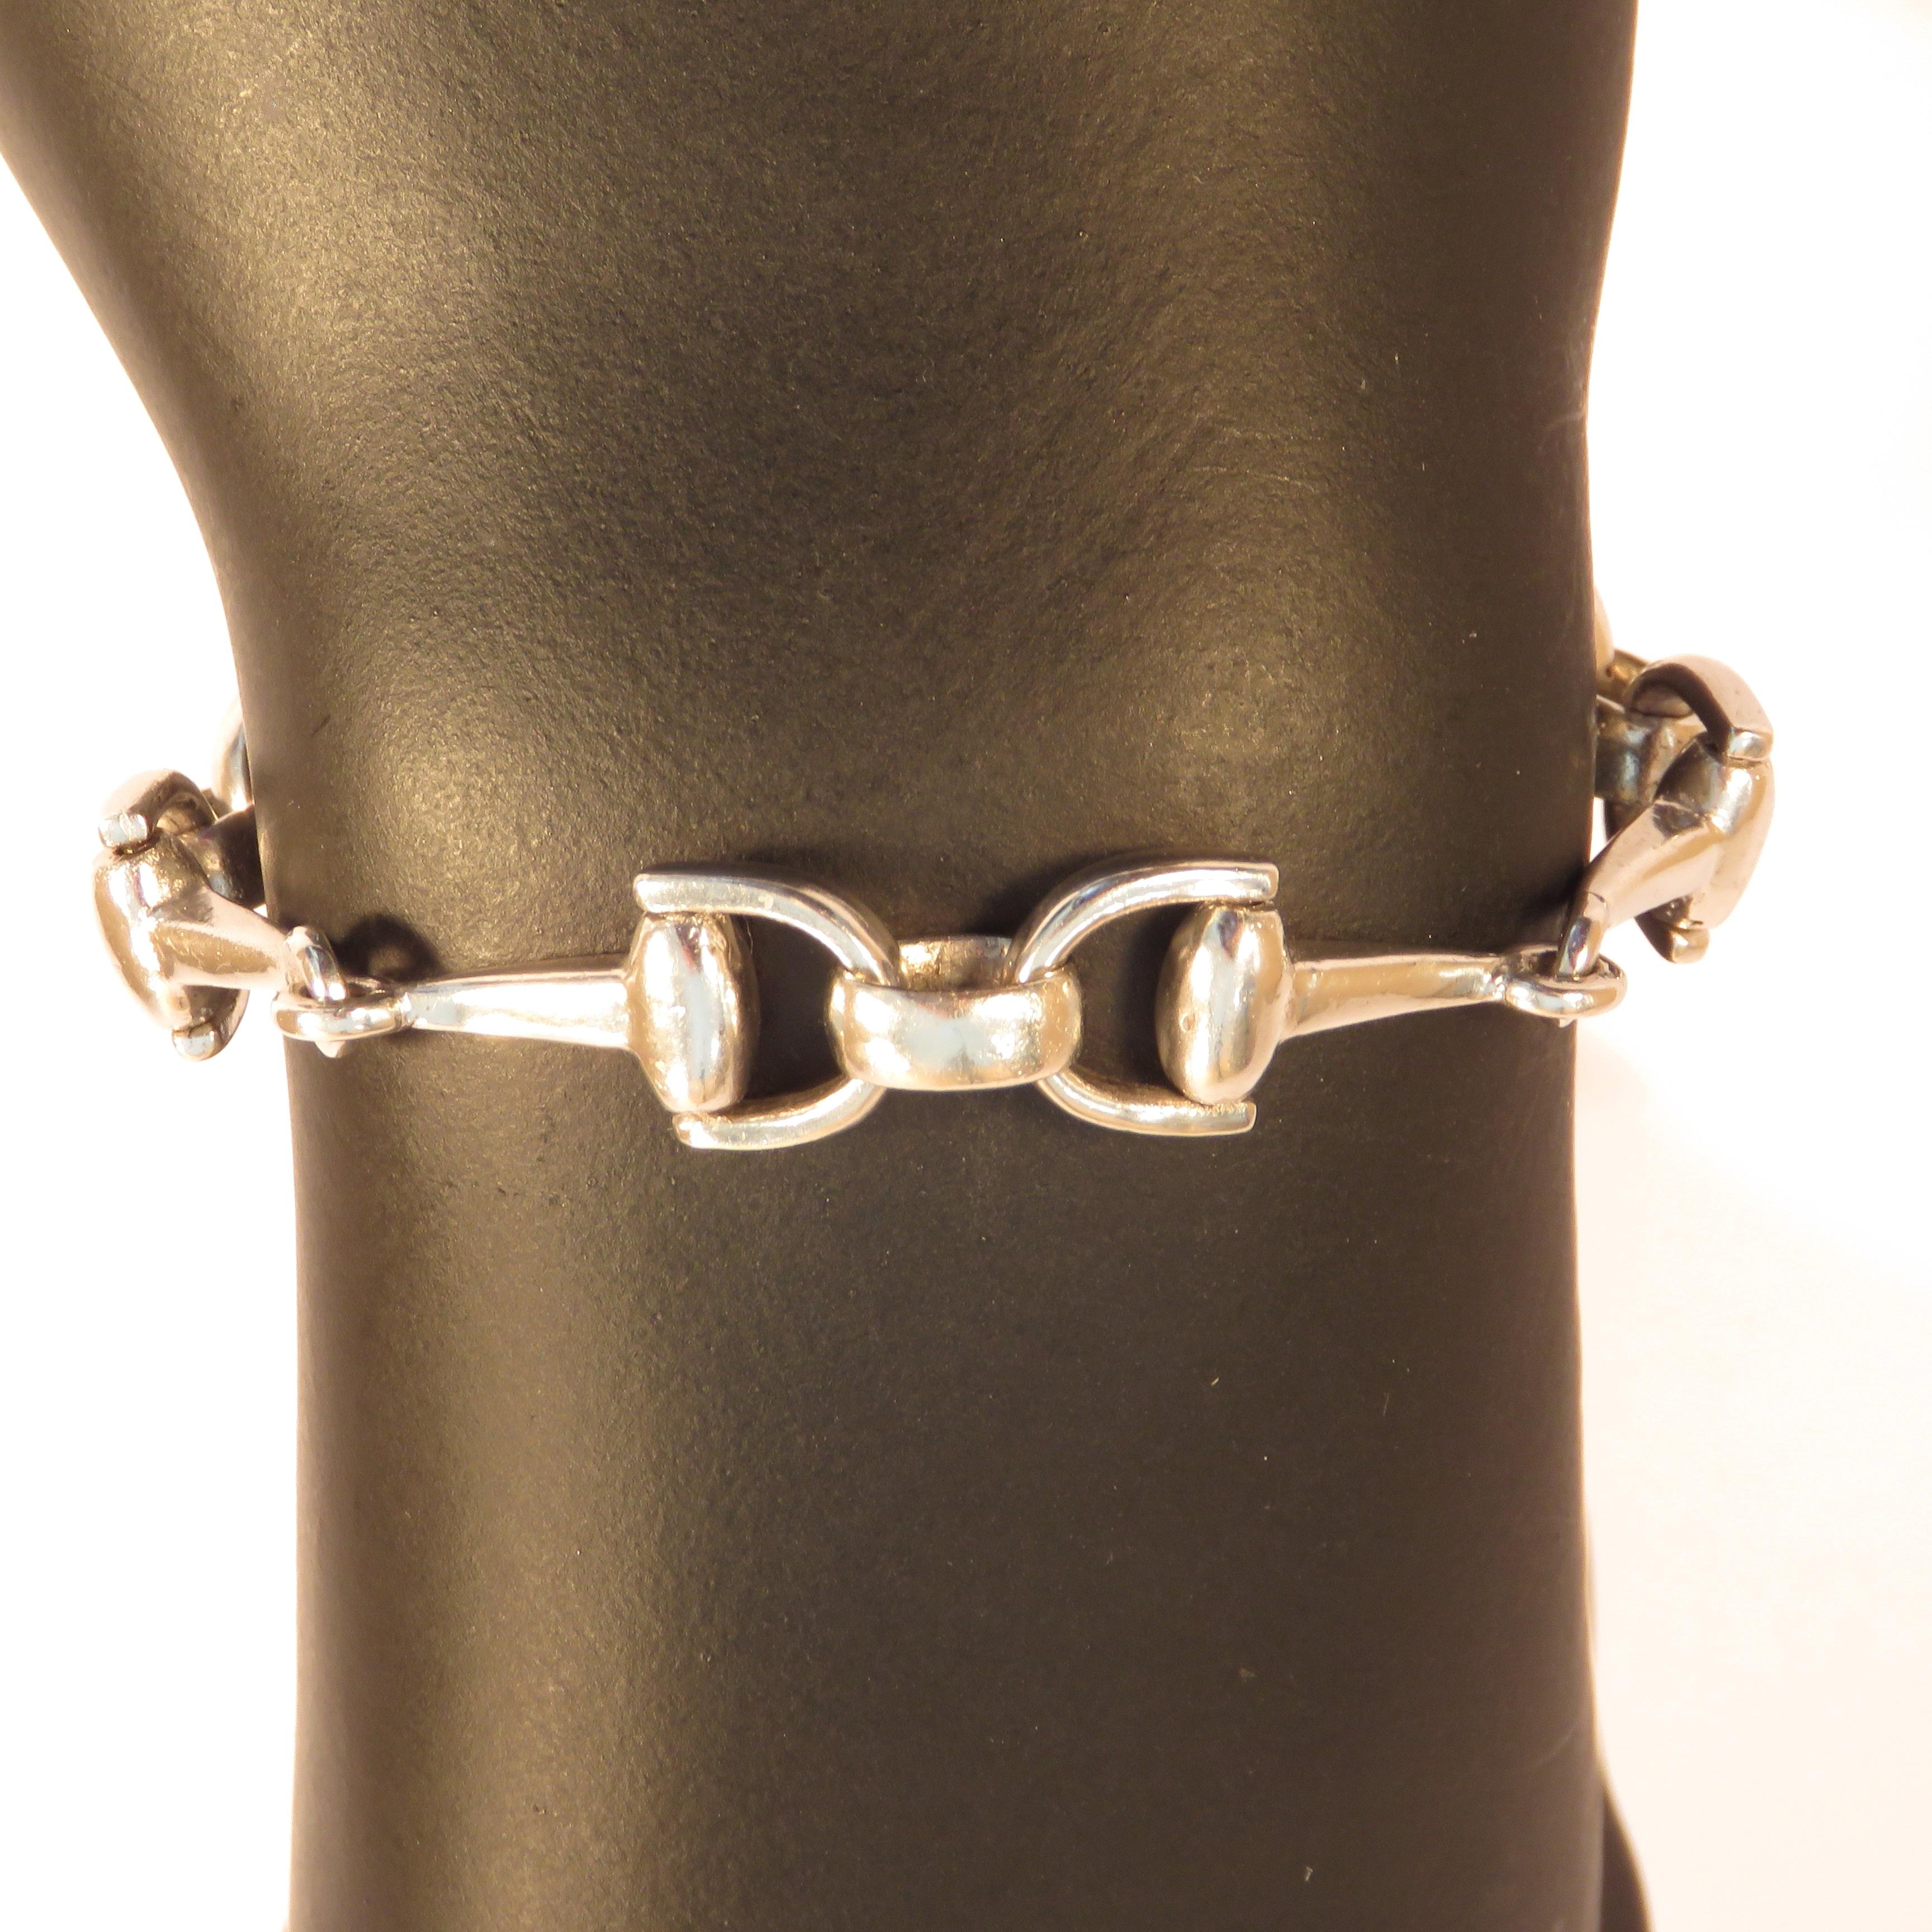 Contemporary Solid Silver Horse Stirrup Bracelet Handcrafted in Italy